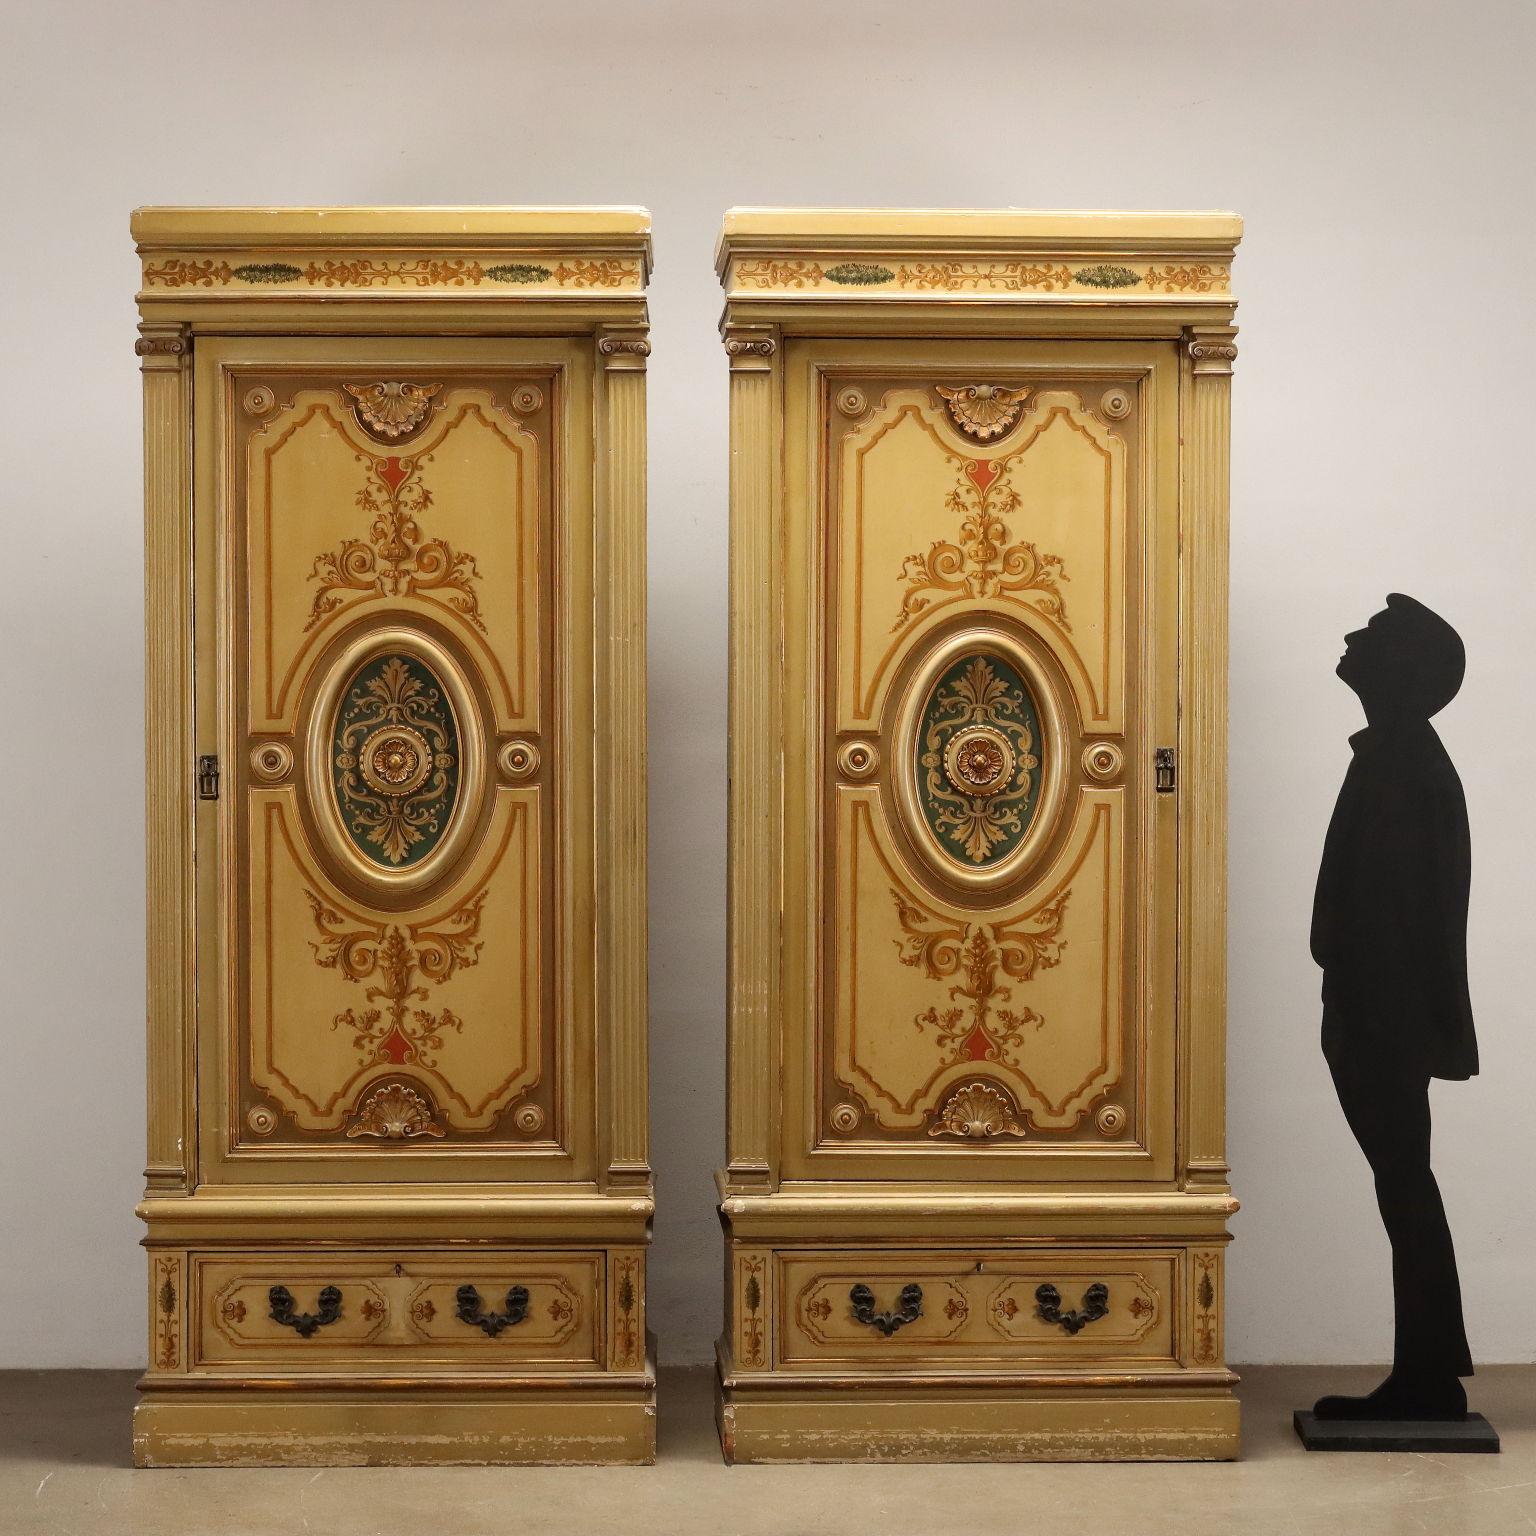 Pair of style closets with door and drawer in the lower band, Italy 20th century. Entirely lacquered, they are adorned with gilded carvings and painted with festoon motifs, curls and phytomorphic elements. Embellished with gold moldings. The sashes